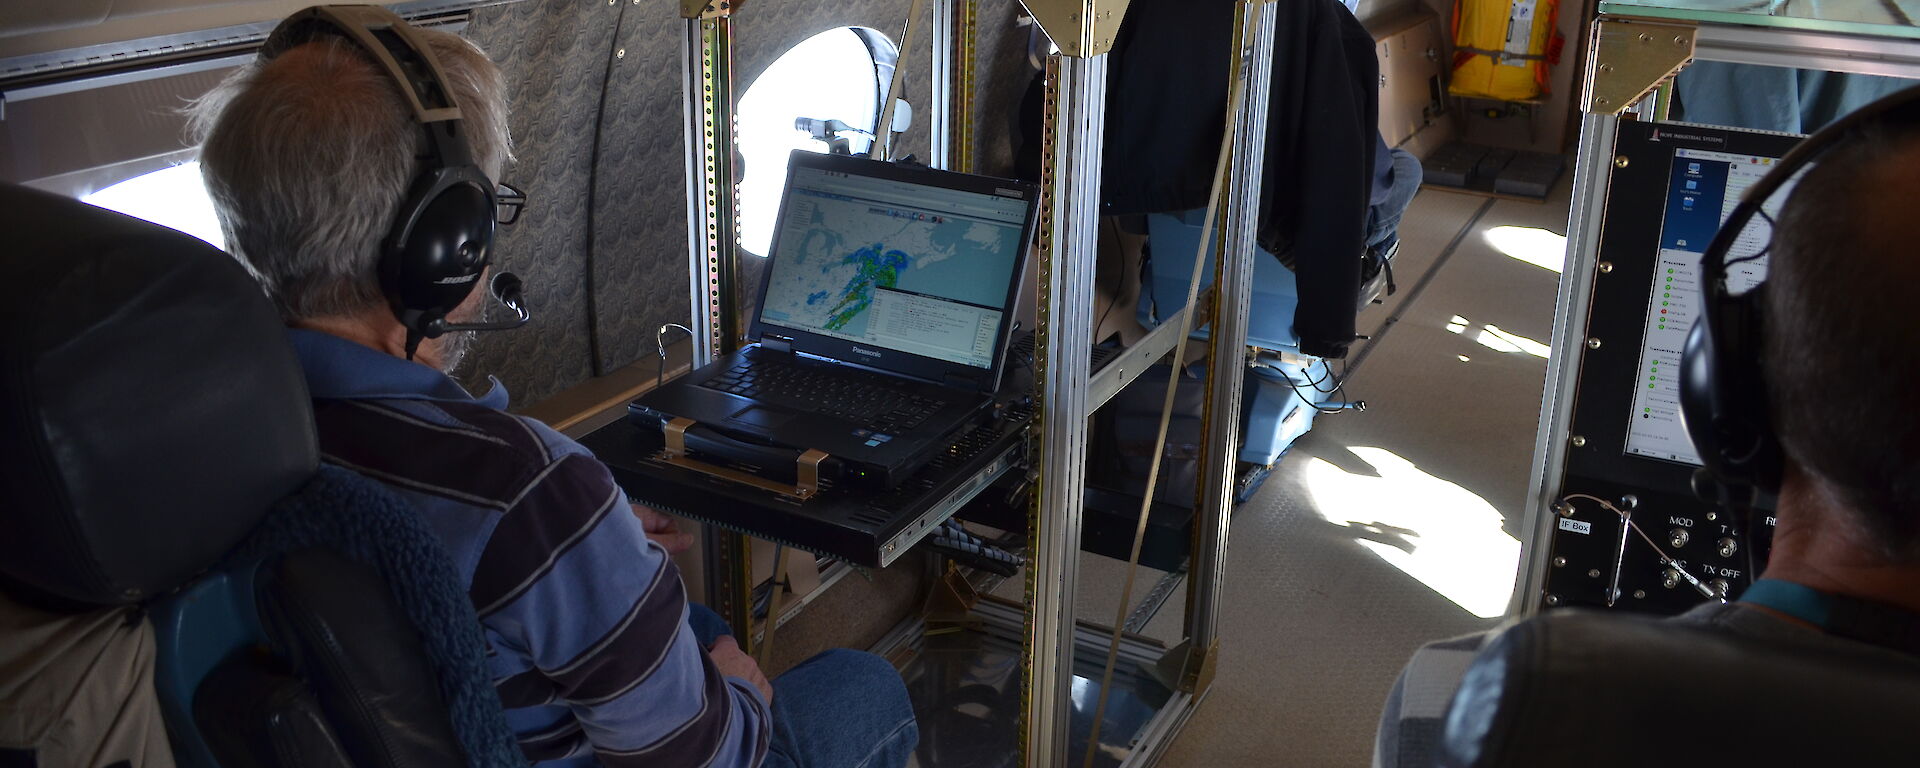 Scientists on board the NSF/NCAR HIAPER Gulfstream V studying real-time data collected by the aircraft’s cloud radar.